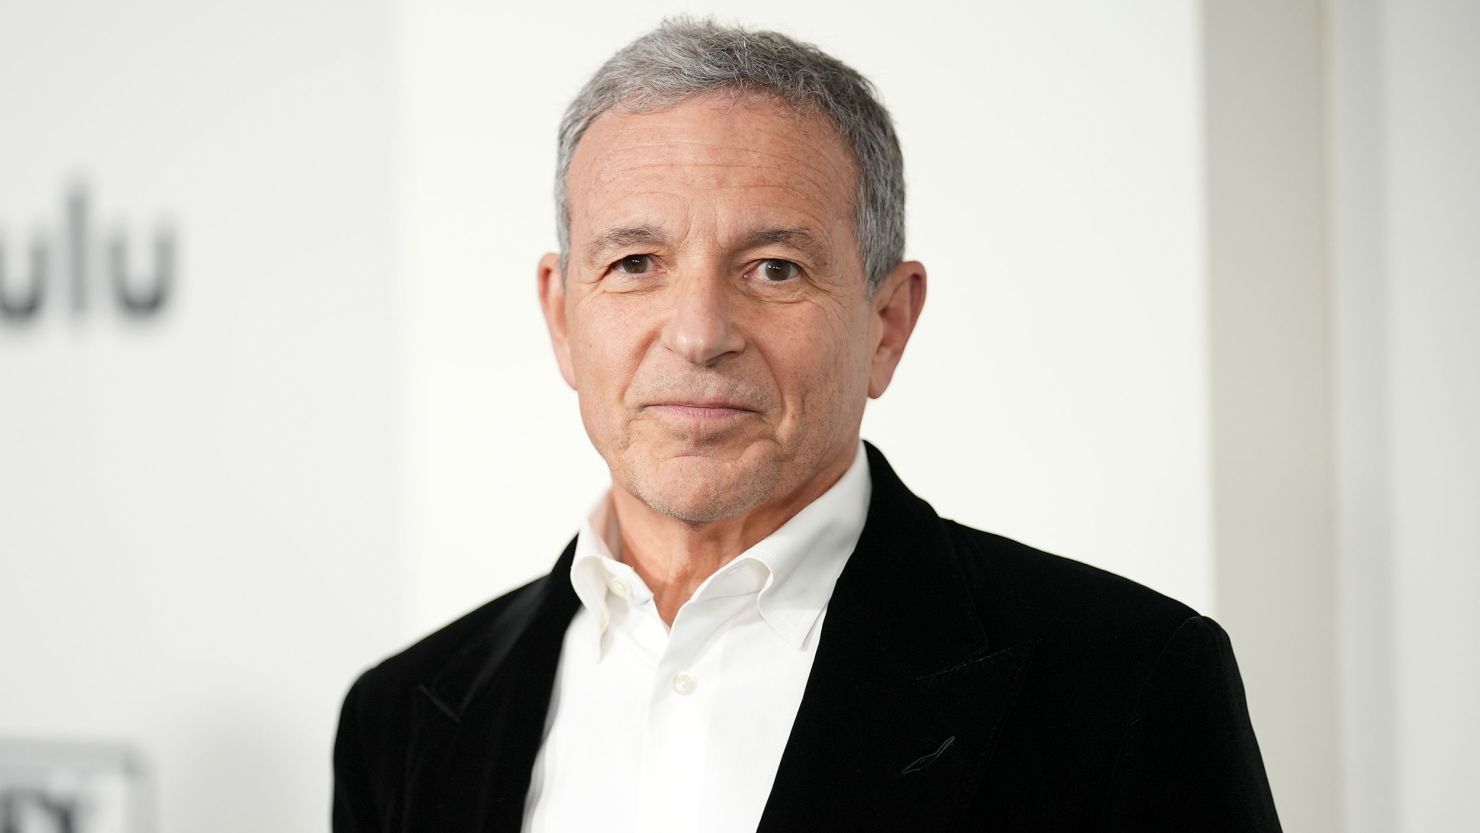 Walt Disney Co. CEO Bob Iger prevailed over his opponents in the recent proxy fight largely by addressing their talking points beforehand.